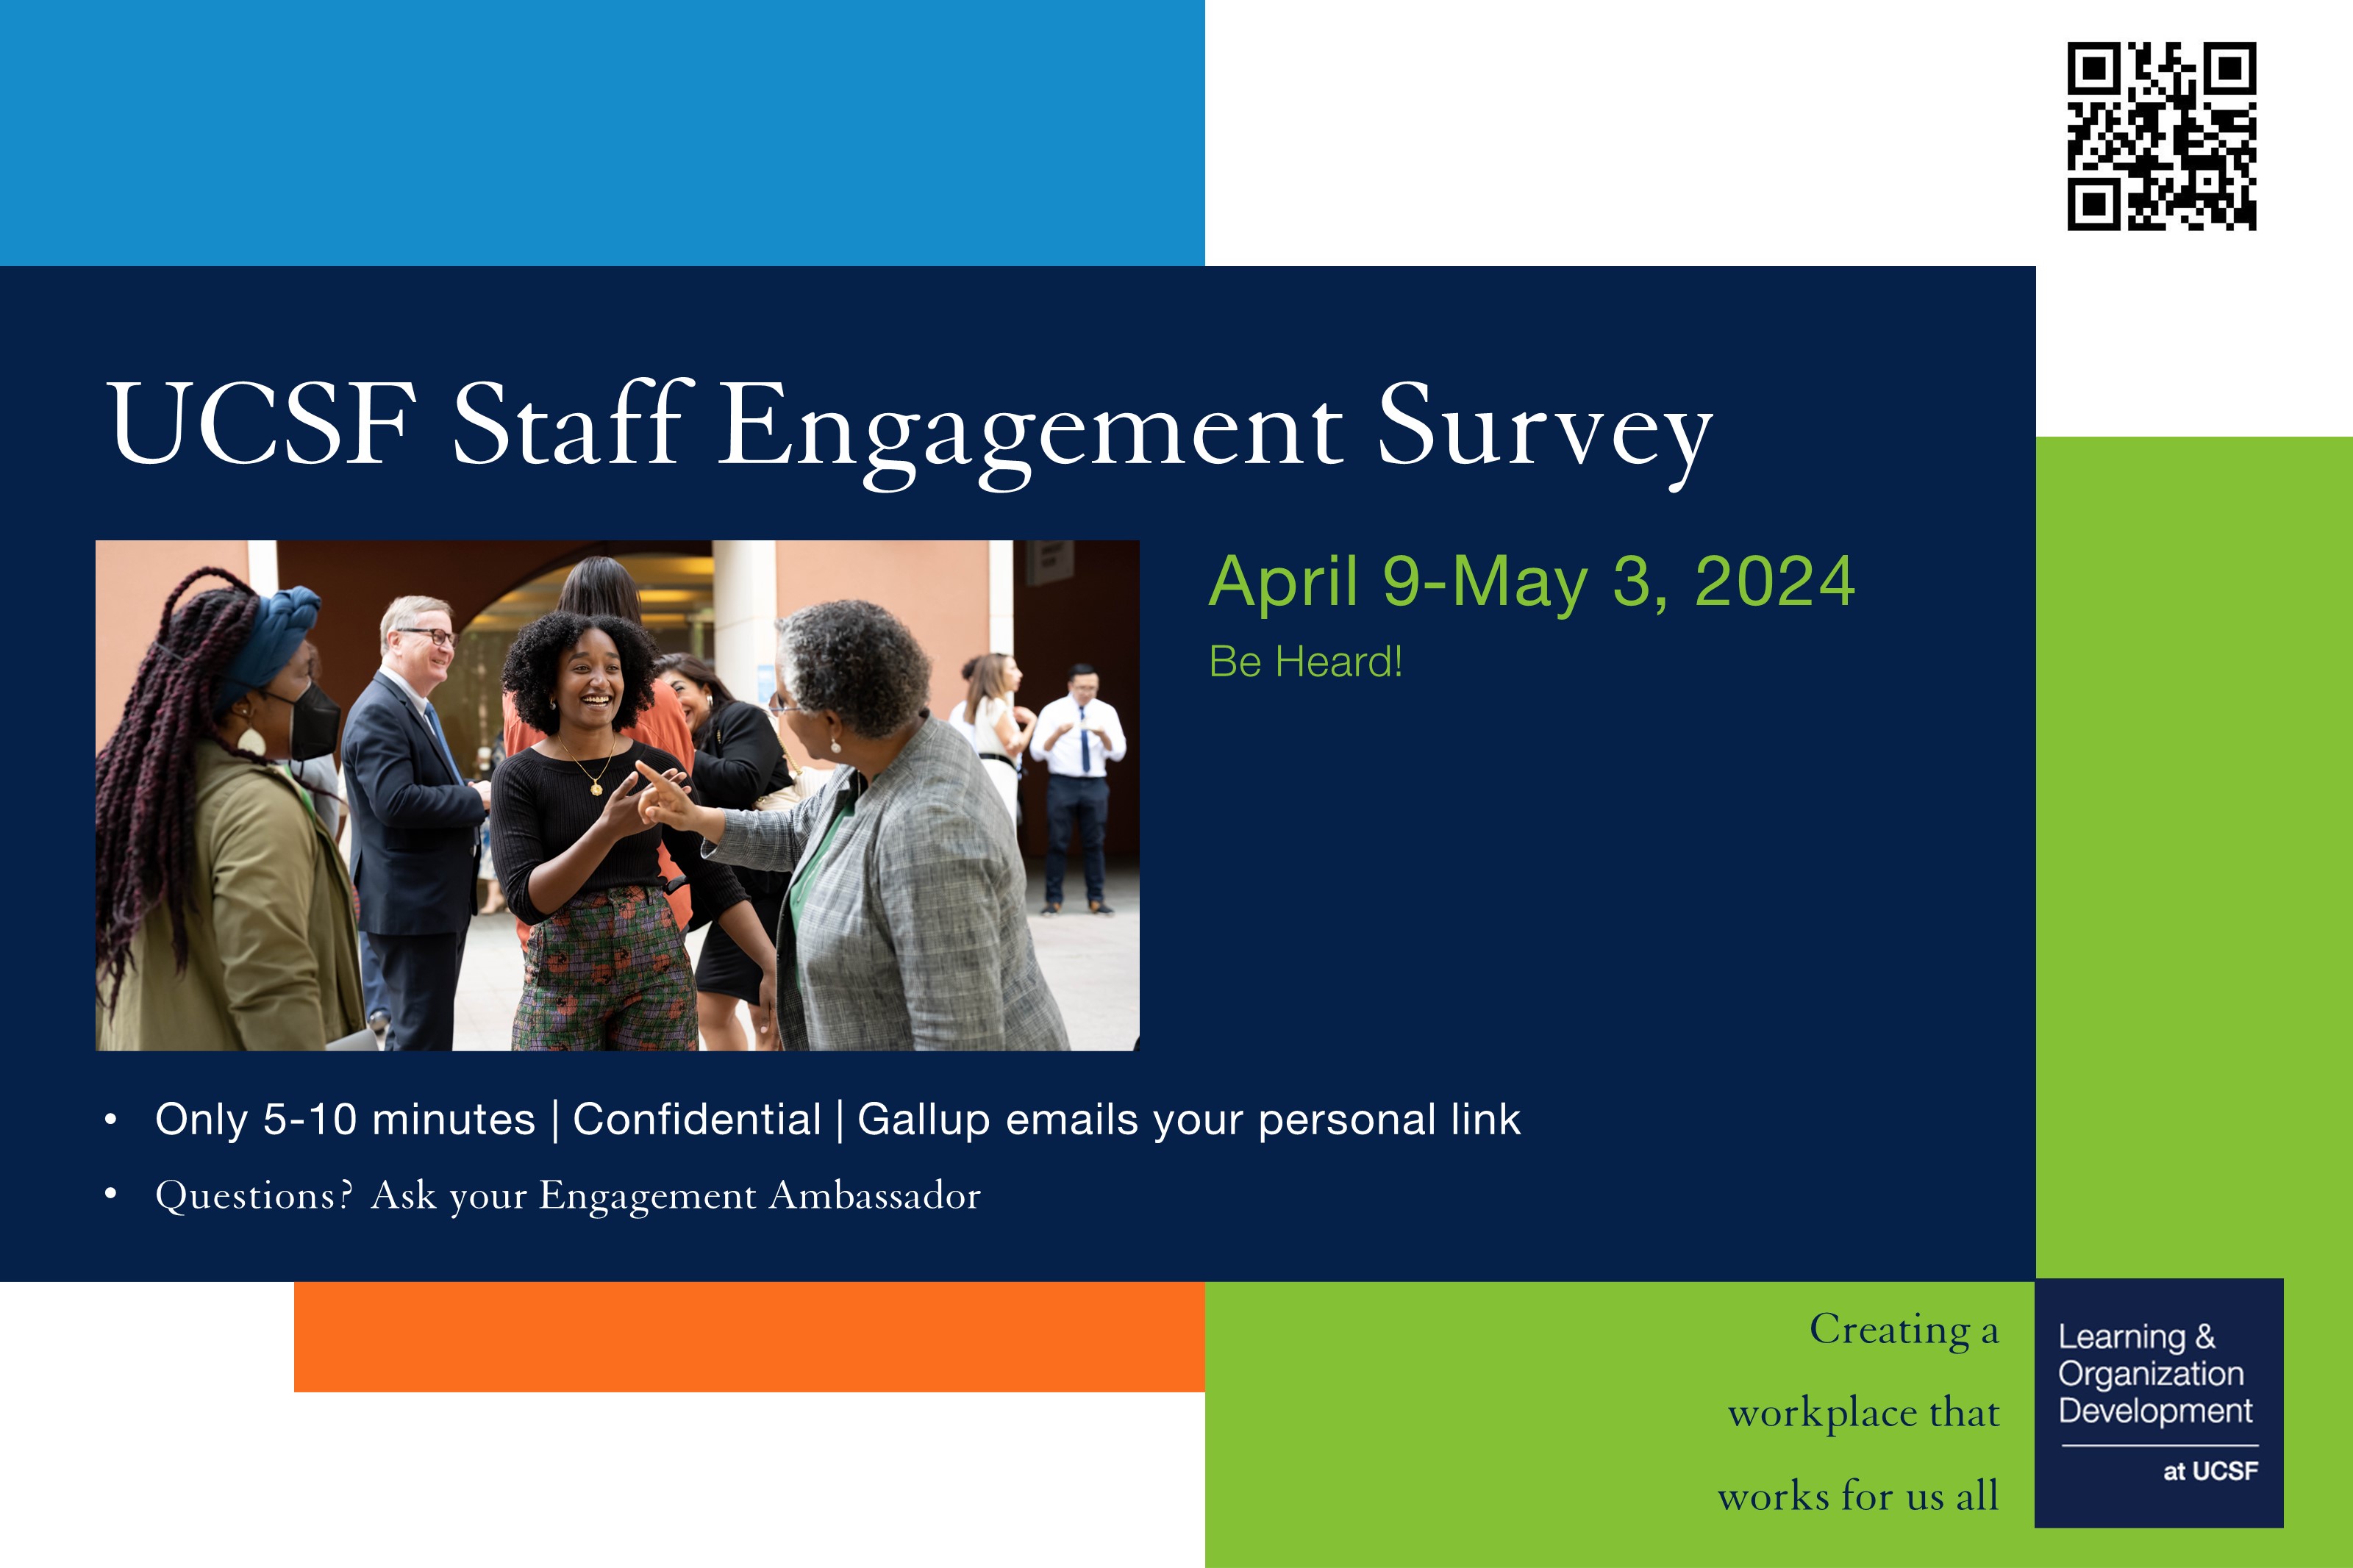 UCSF Engagement Survey, April 9 to May3, 2024. Be Heard! Only 5-10 minutes, confidential, Gallup emails your personal link. Questions? Ask your Engagement Ambassador